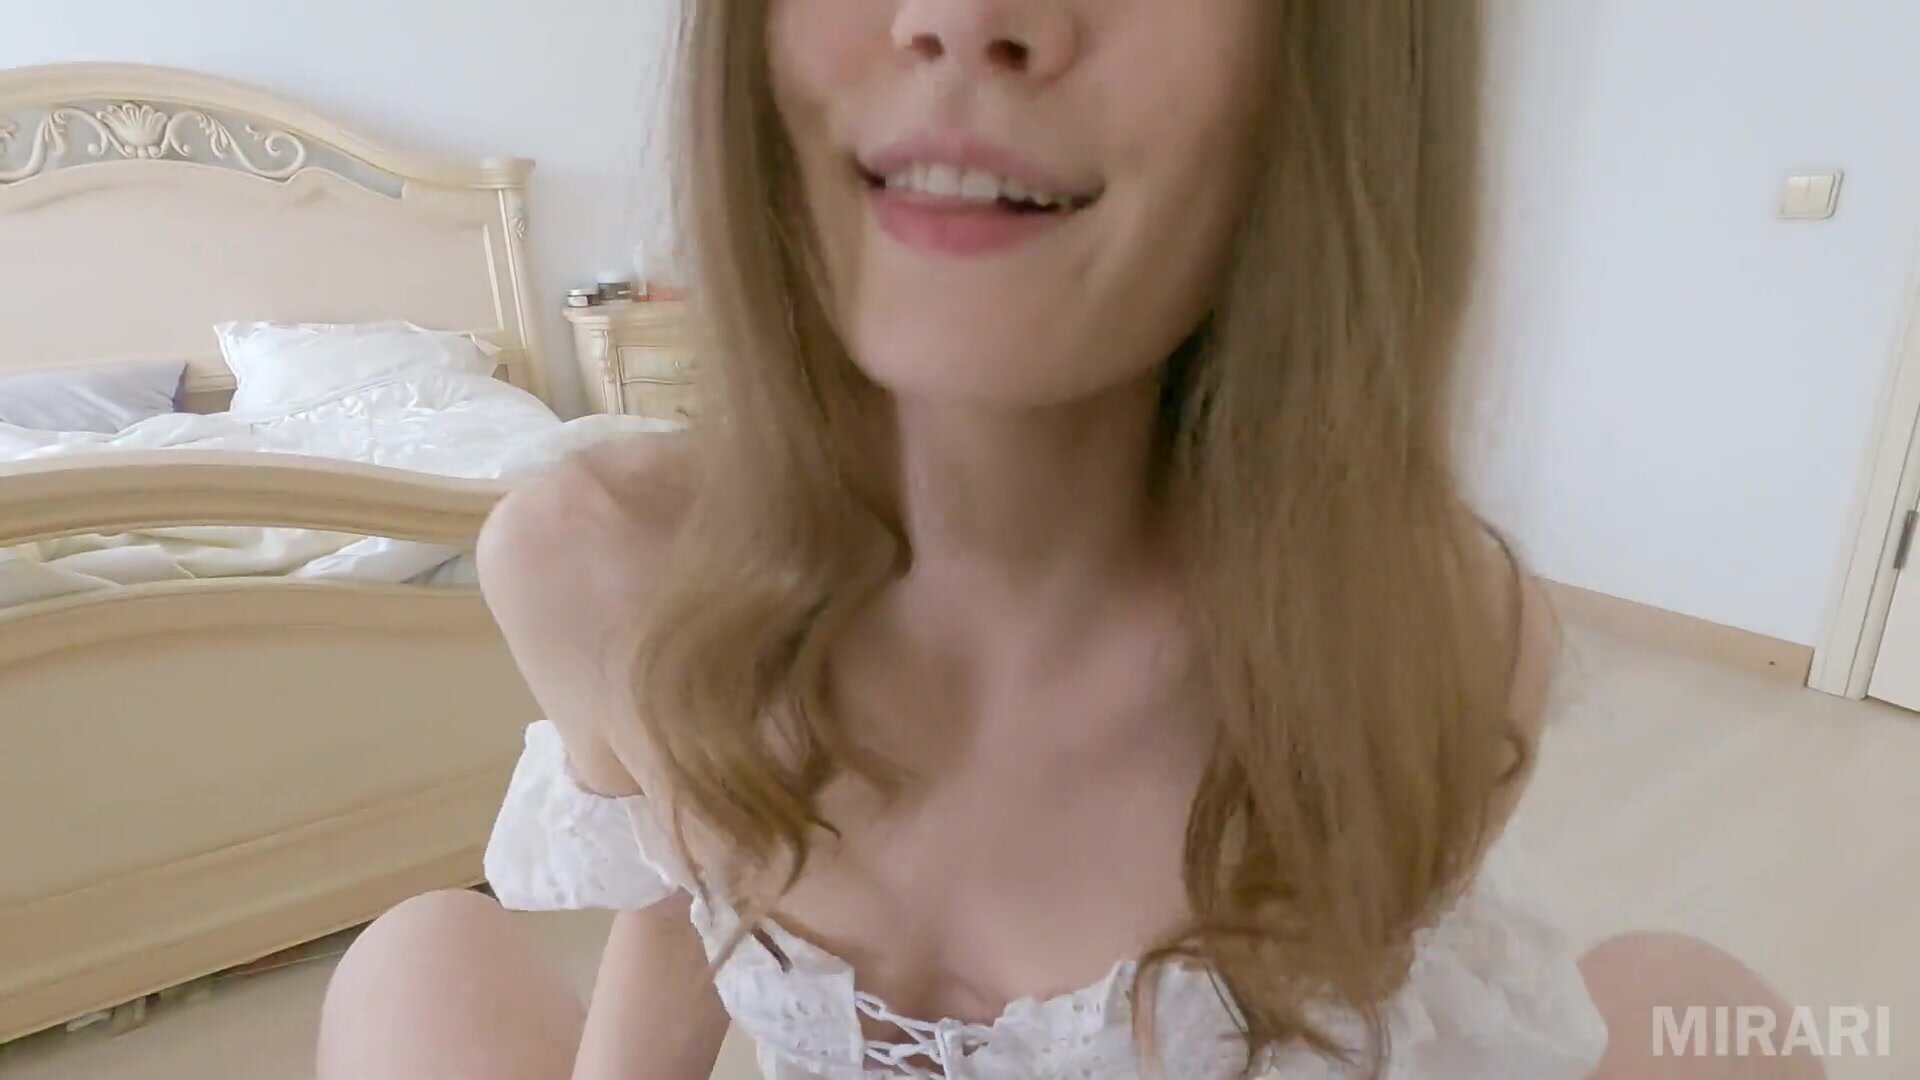 MIRARI - Cummed Ass and Cum Stained the Dress of His In